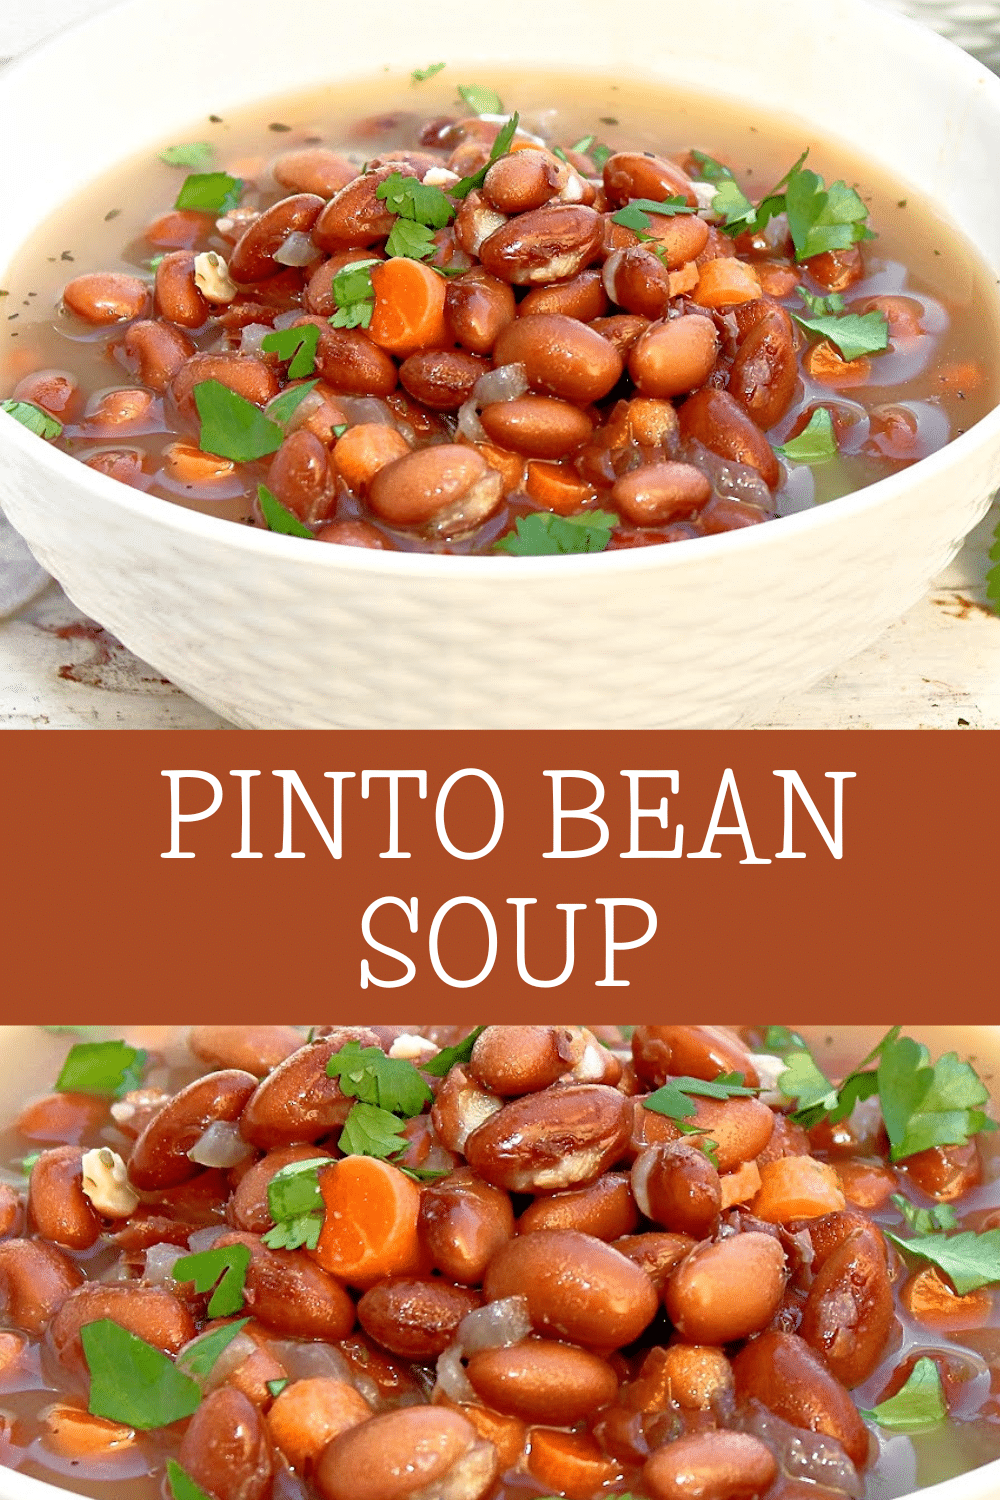 Pinto Bean Soup ~ Easy and budget-friendly soup made with pantry and fridge staples. Ready to serve in about 30 minutes! via @thiswifecooks